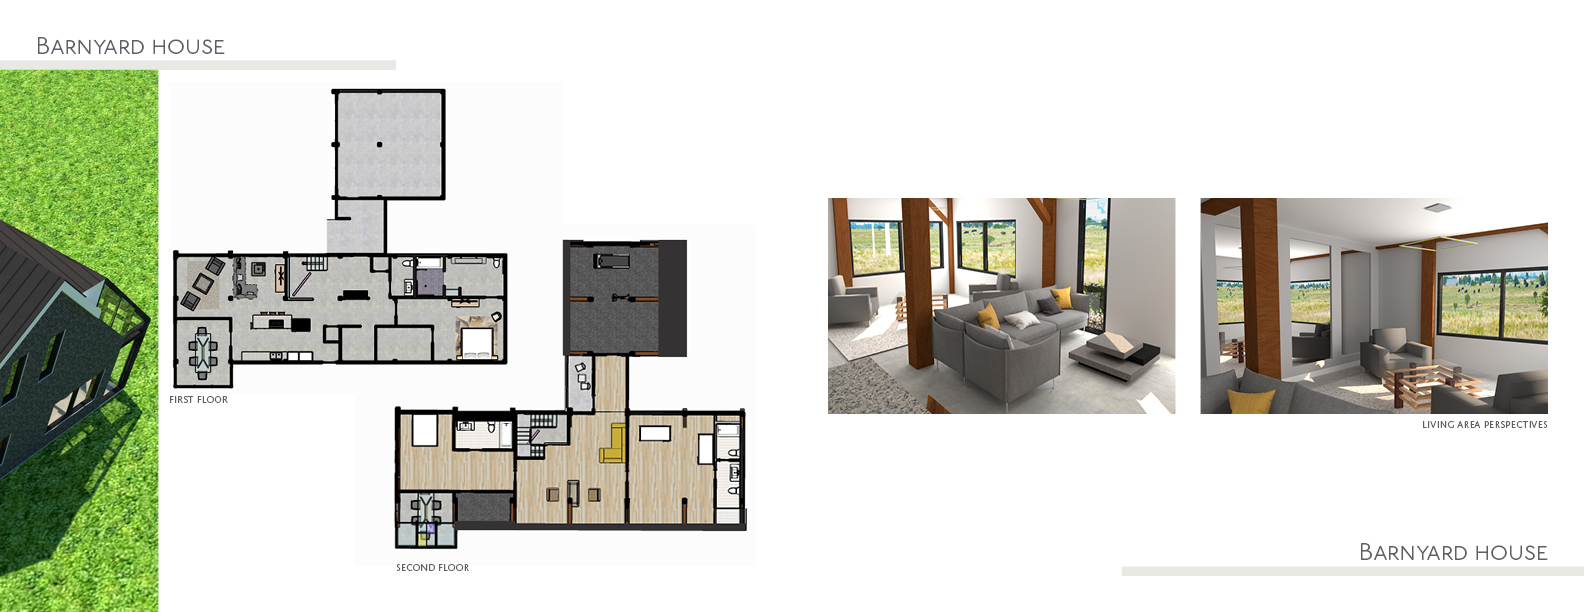 Barnyard house - Floor plan and living area perspectives